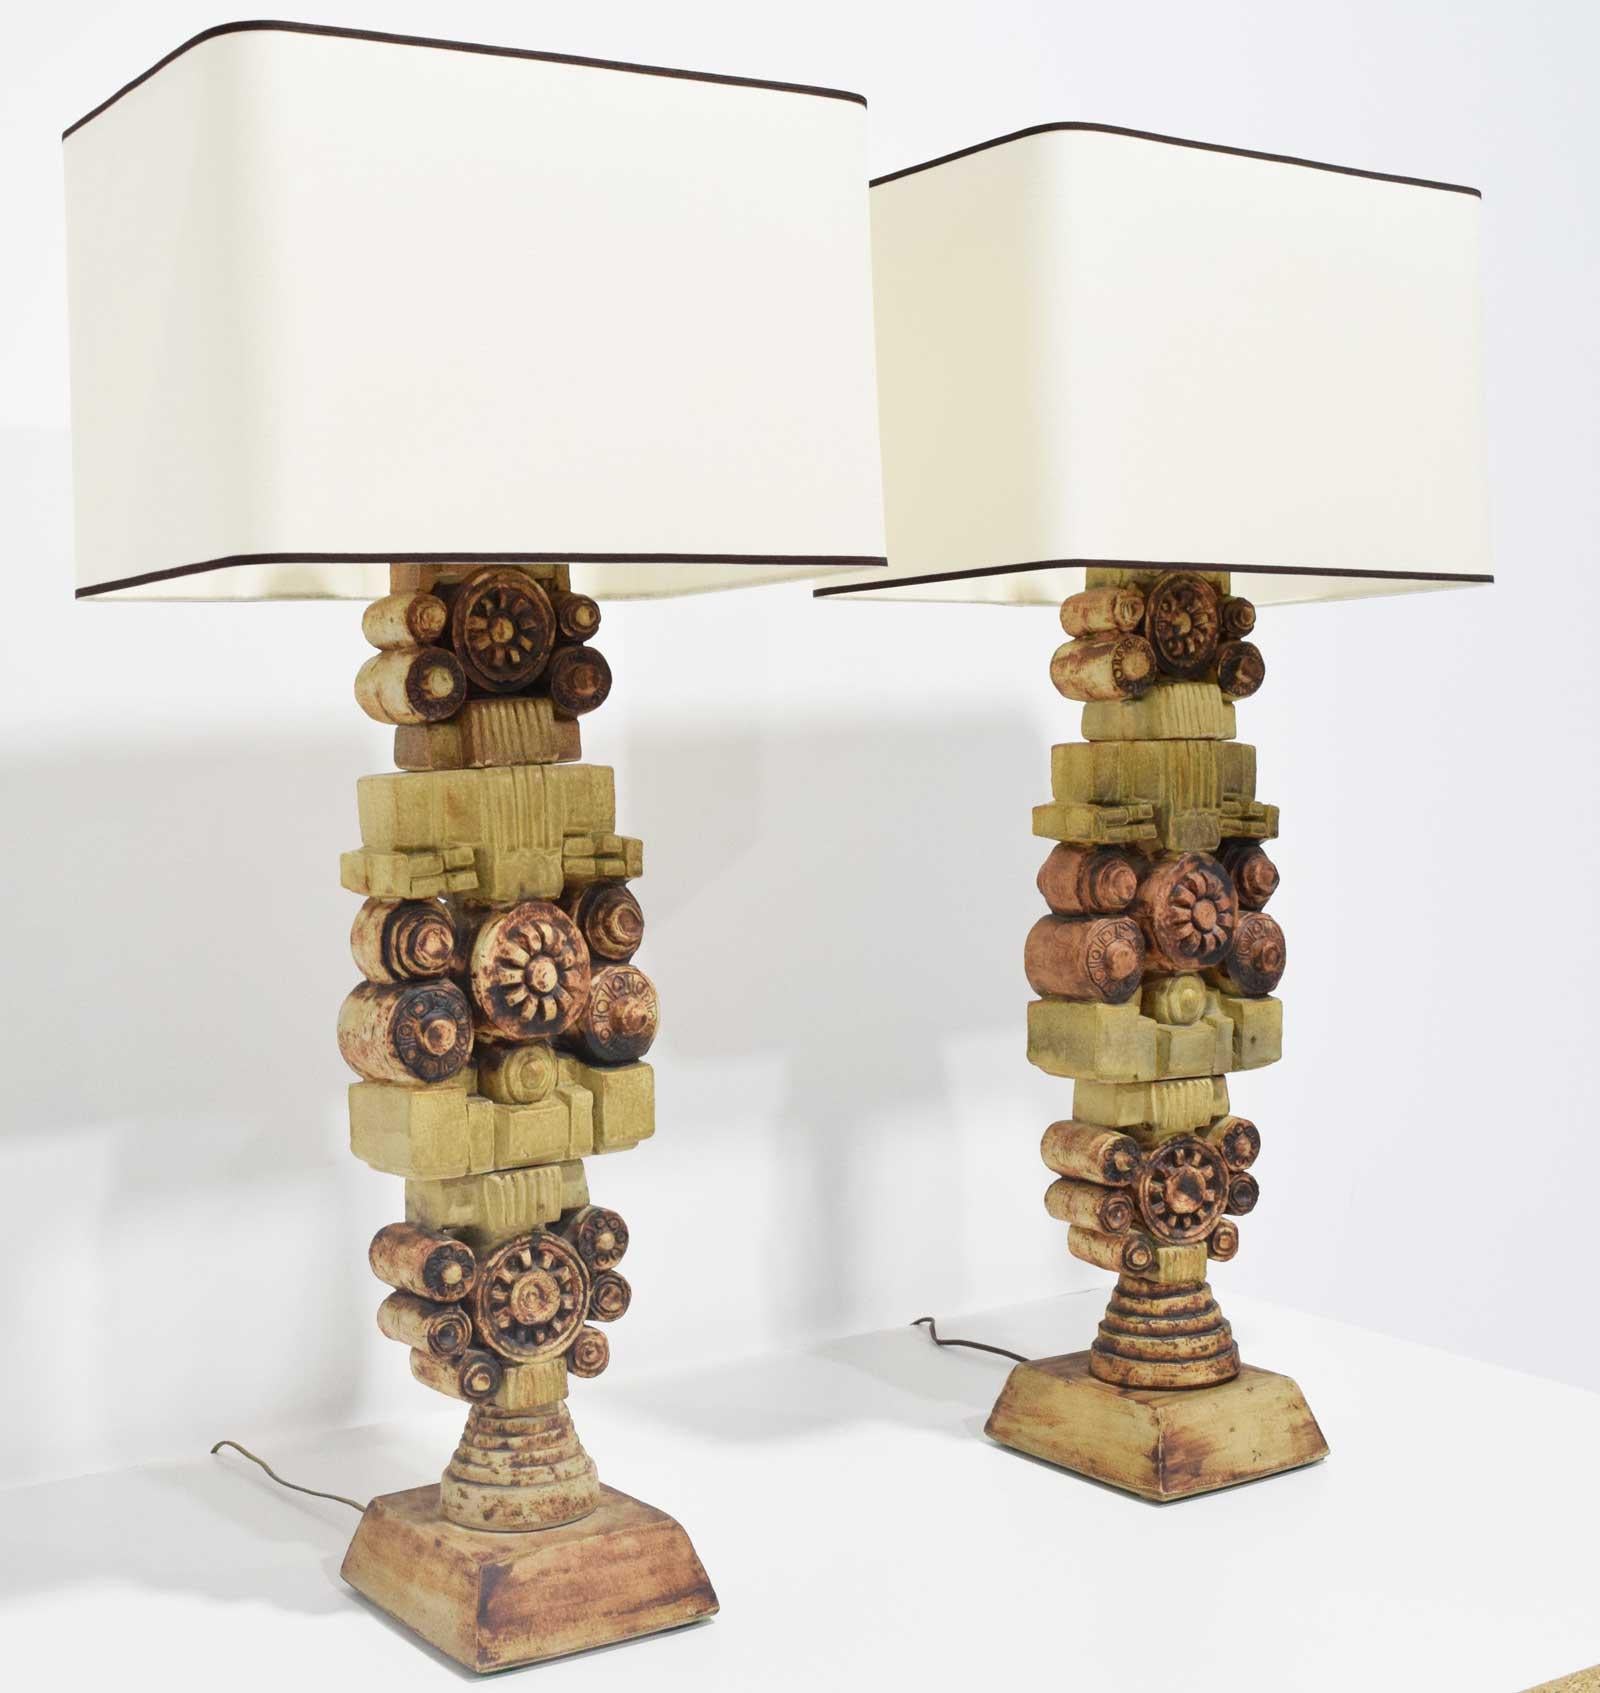 Lamps have an exquisite sculptural design, made of ceramic/ terracotta. 
Lamps are 29